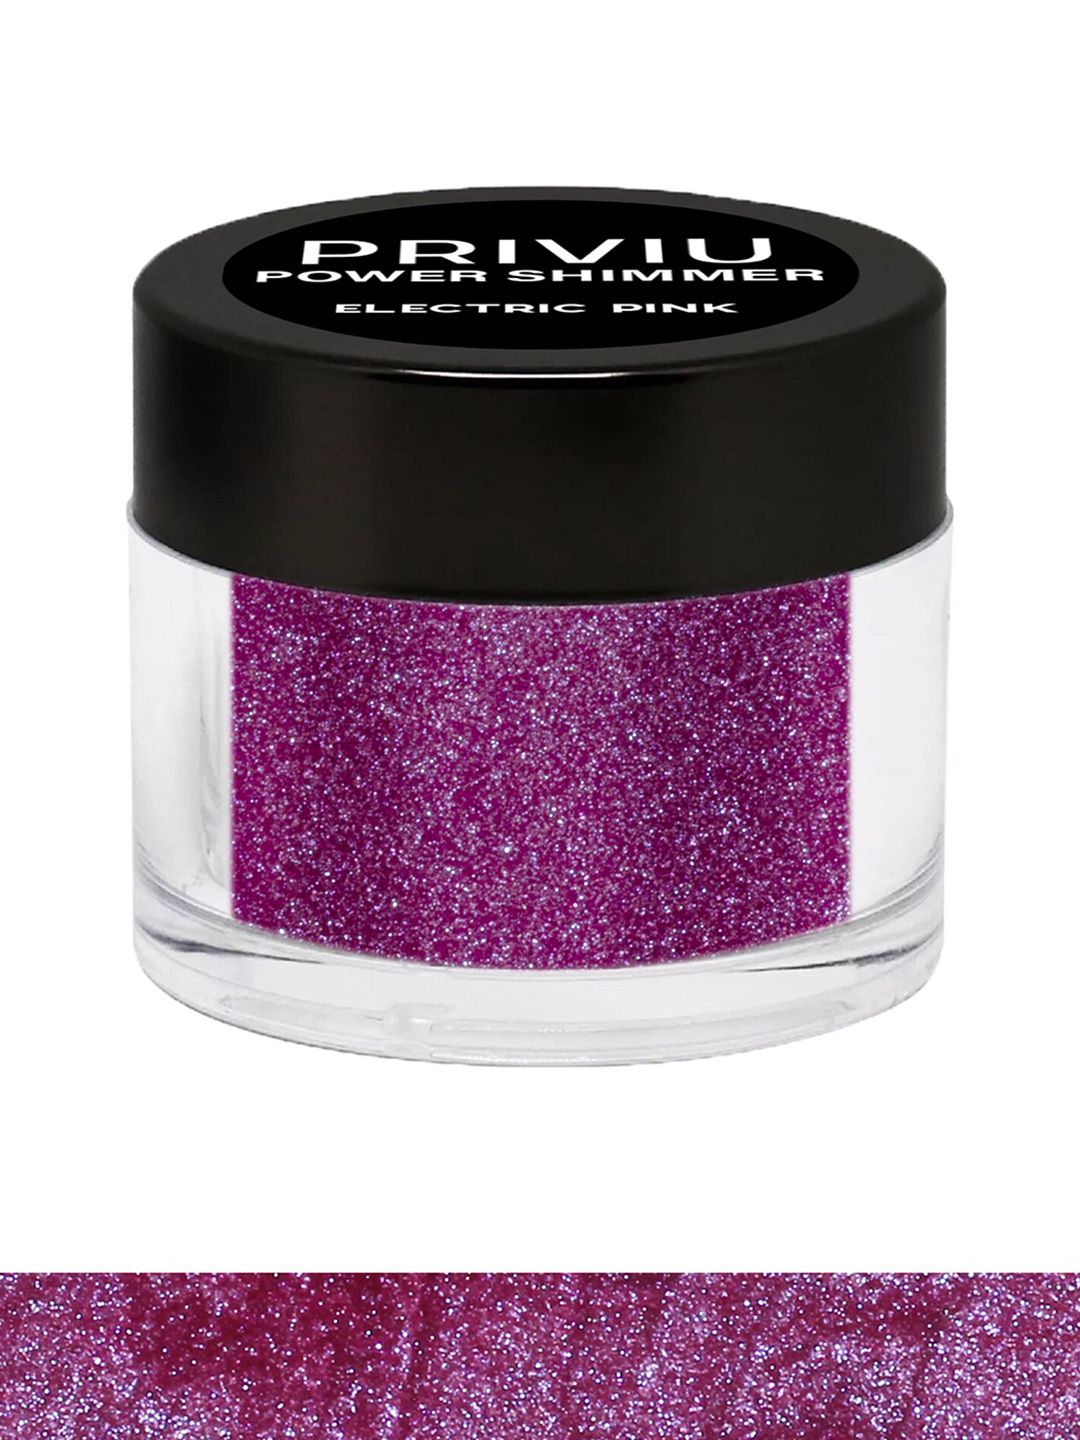 PRIVIU Power Shimmer Eyes & Face Illuminator Highlighter - Electric Pink 15 Price in India